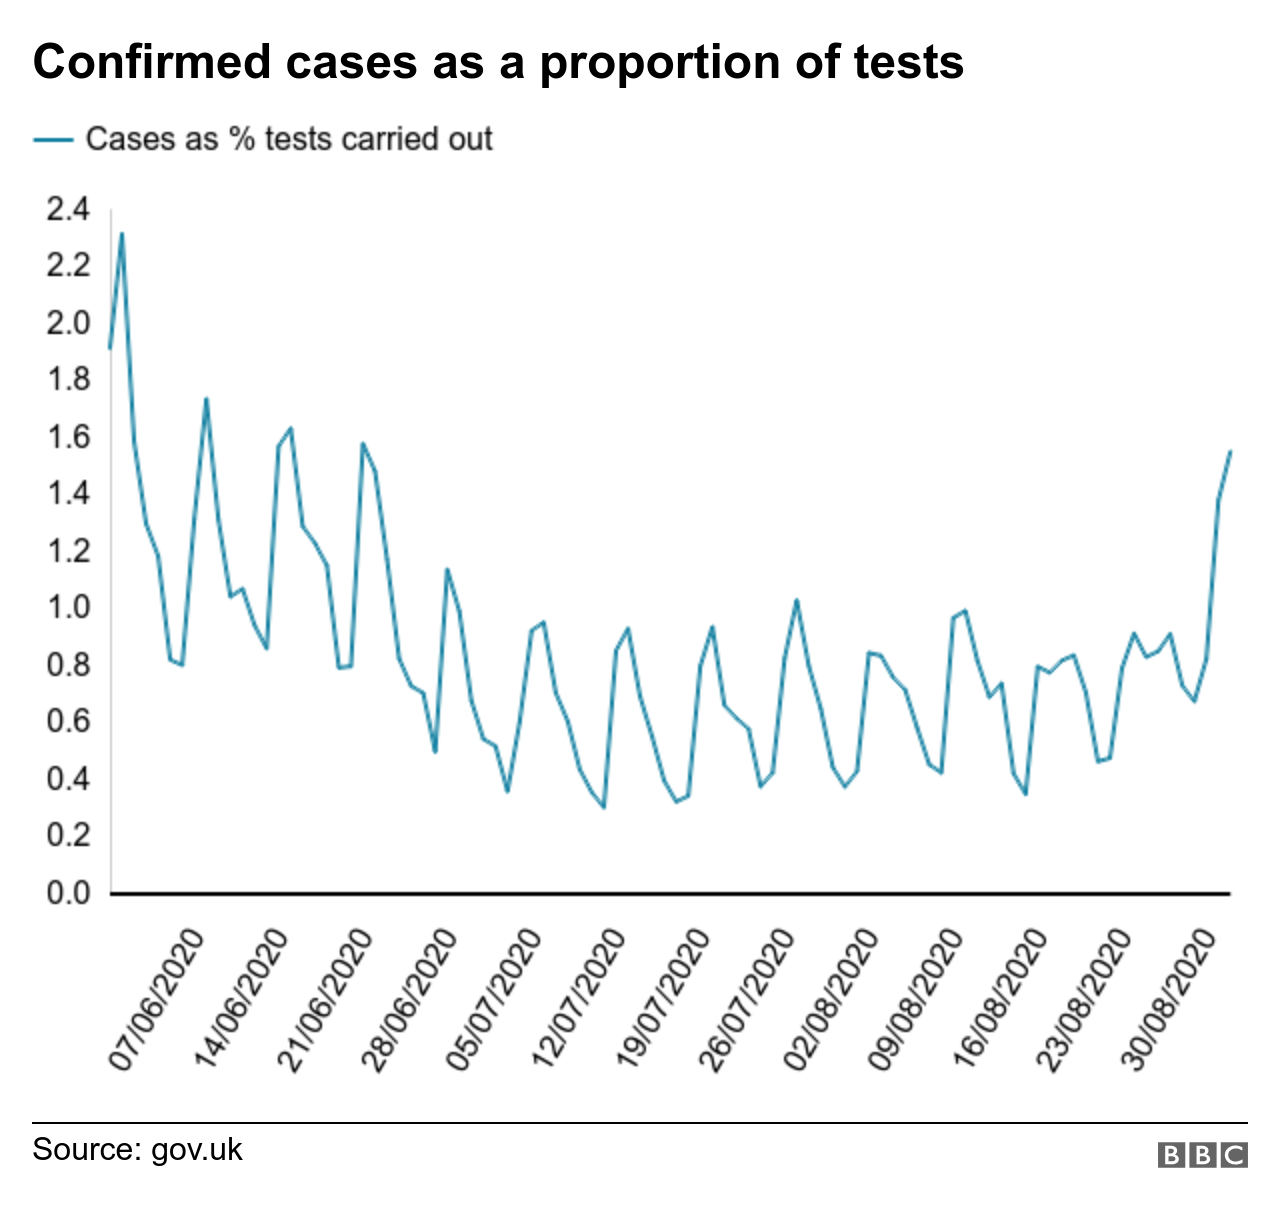 chart showing confirmed cases as a % of tests carried out, June to Aug 2020